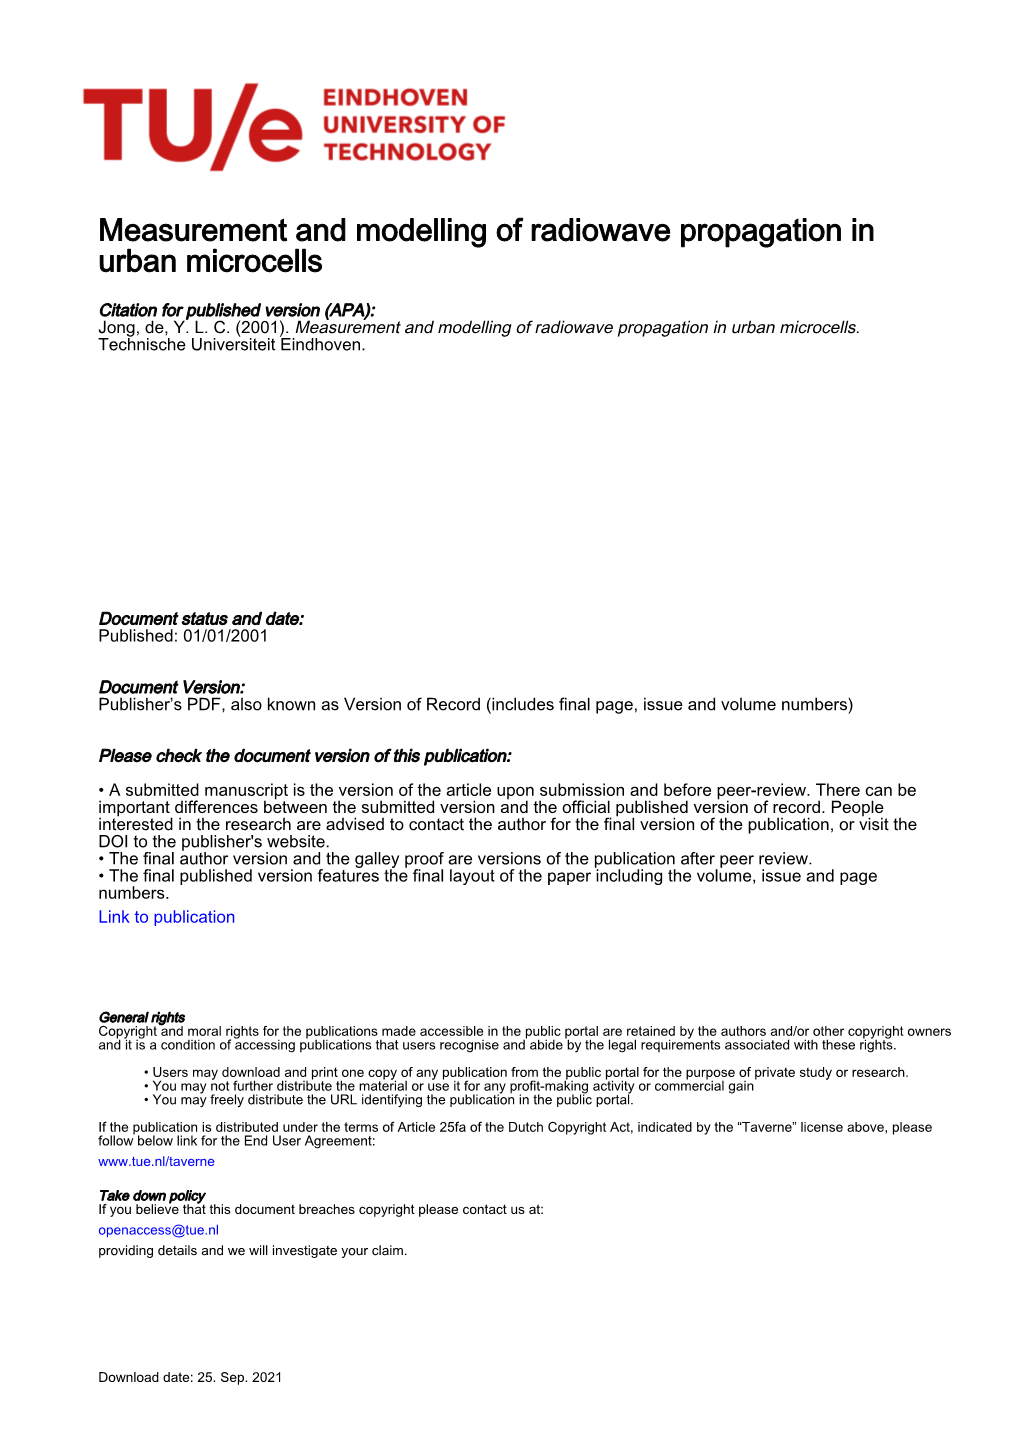 Measurement and Modelling of Radiowave Propagation in Urban Microcells